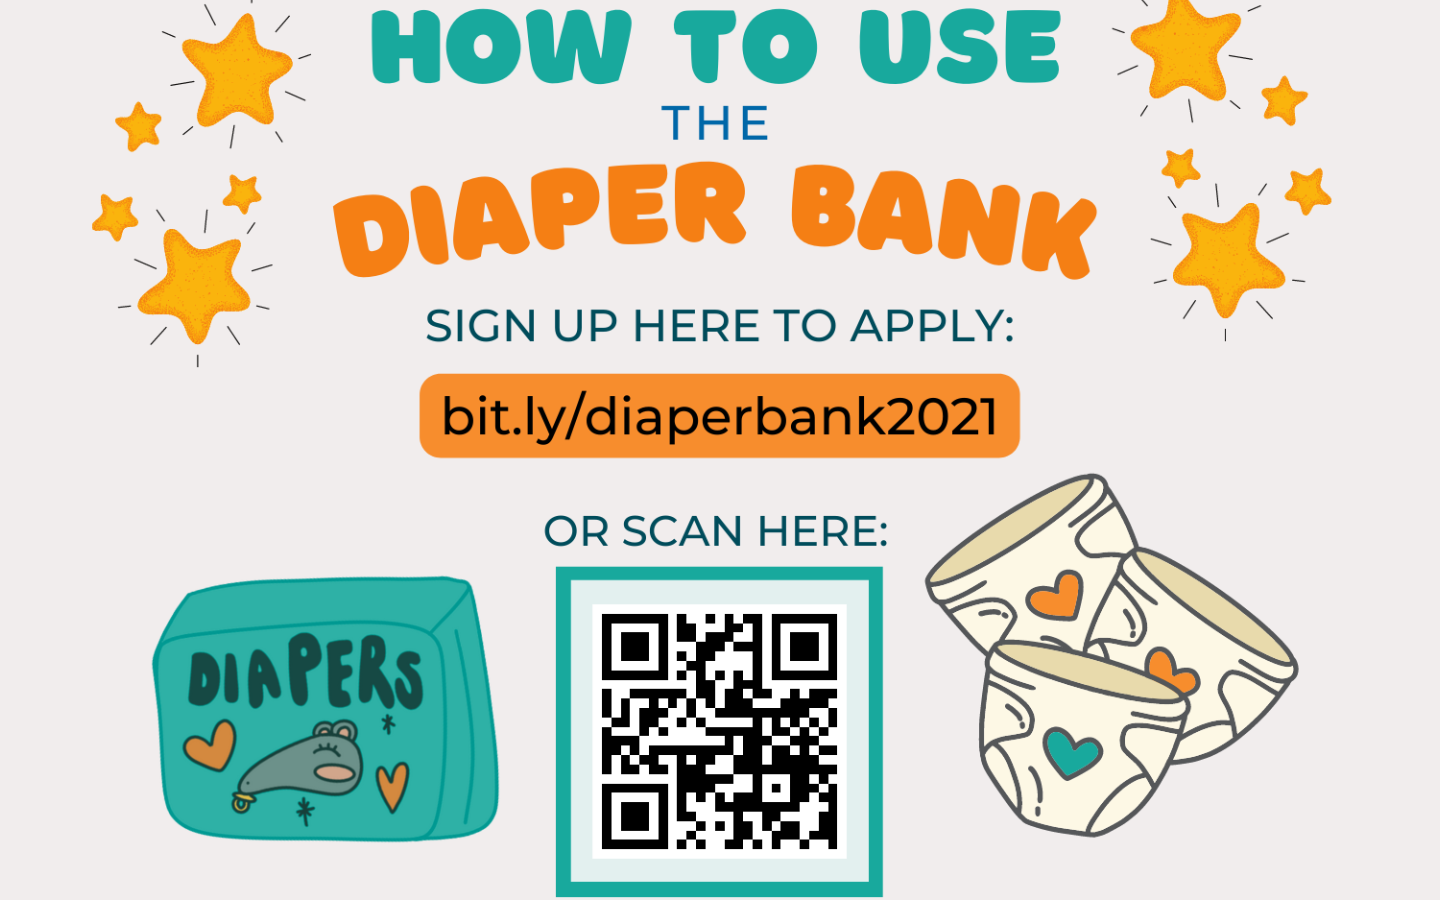 How to use the diaper bank with sign-up link